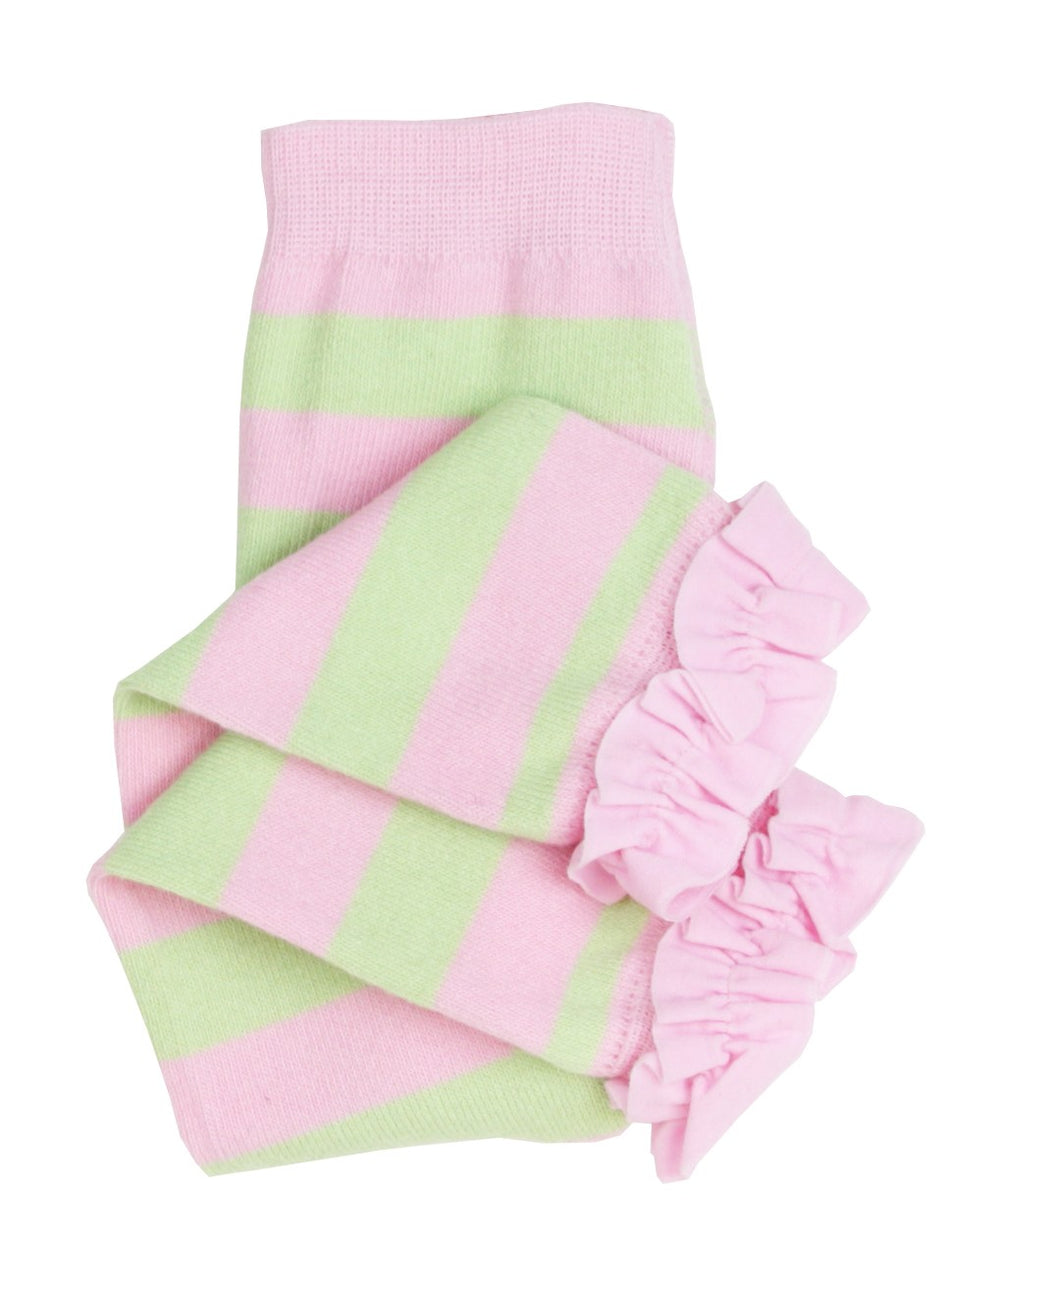 Pink & Lime Ruffled Tights Leggings | 0-6M 6-12M 12-24M 2-4T